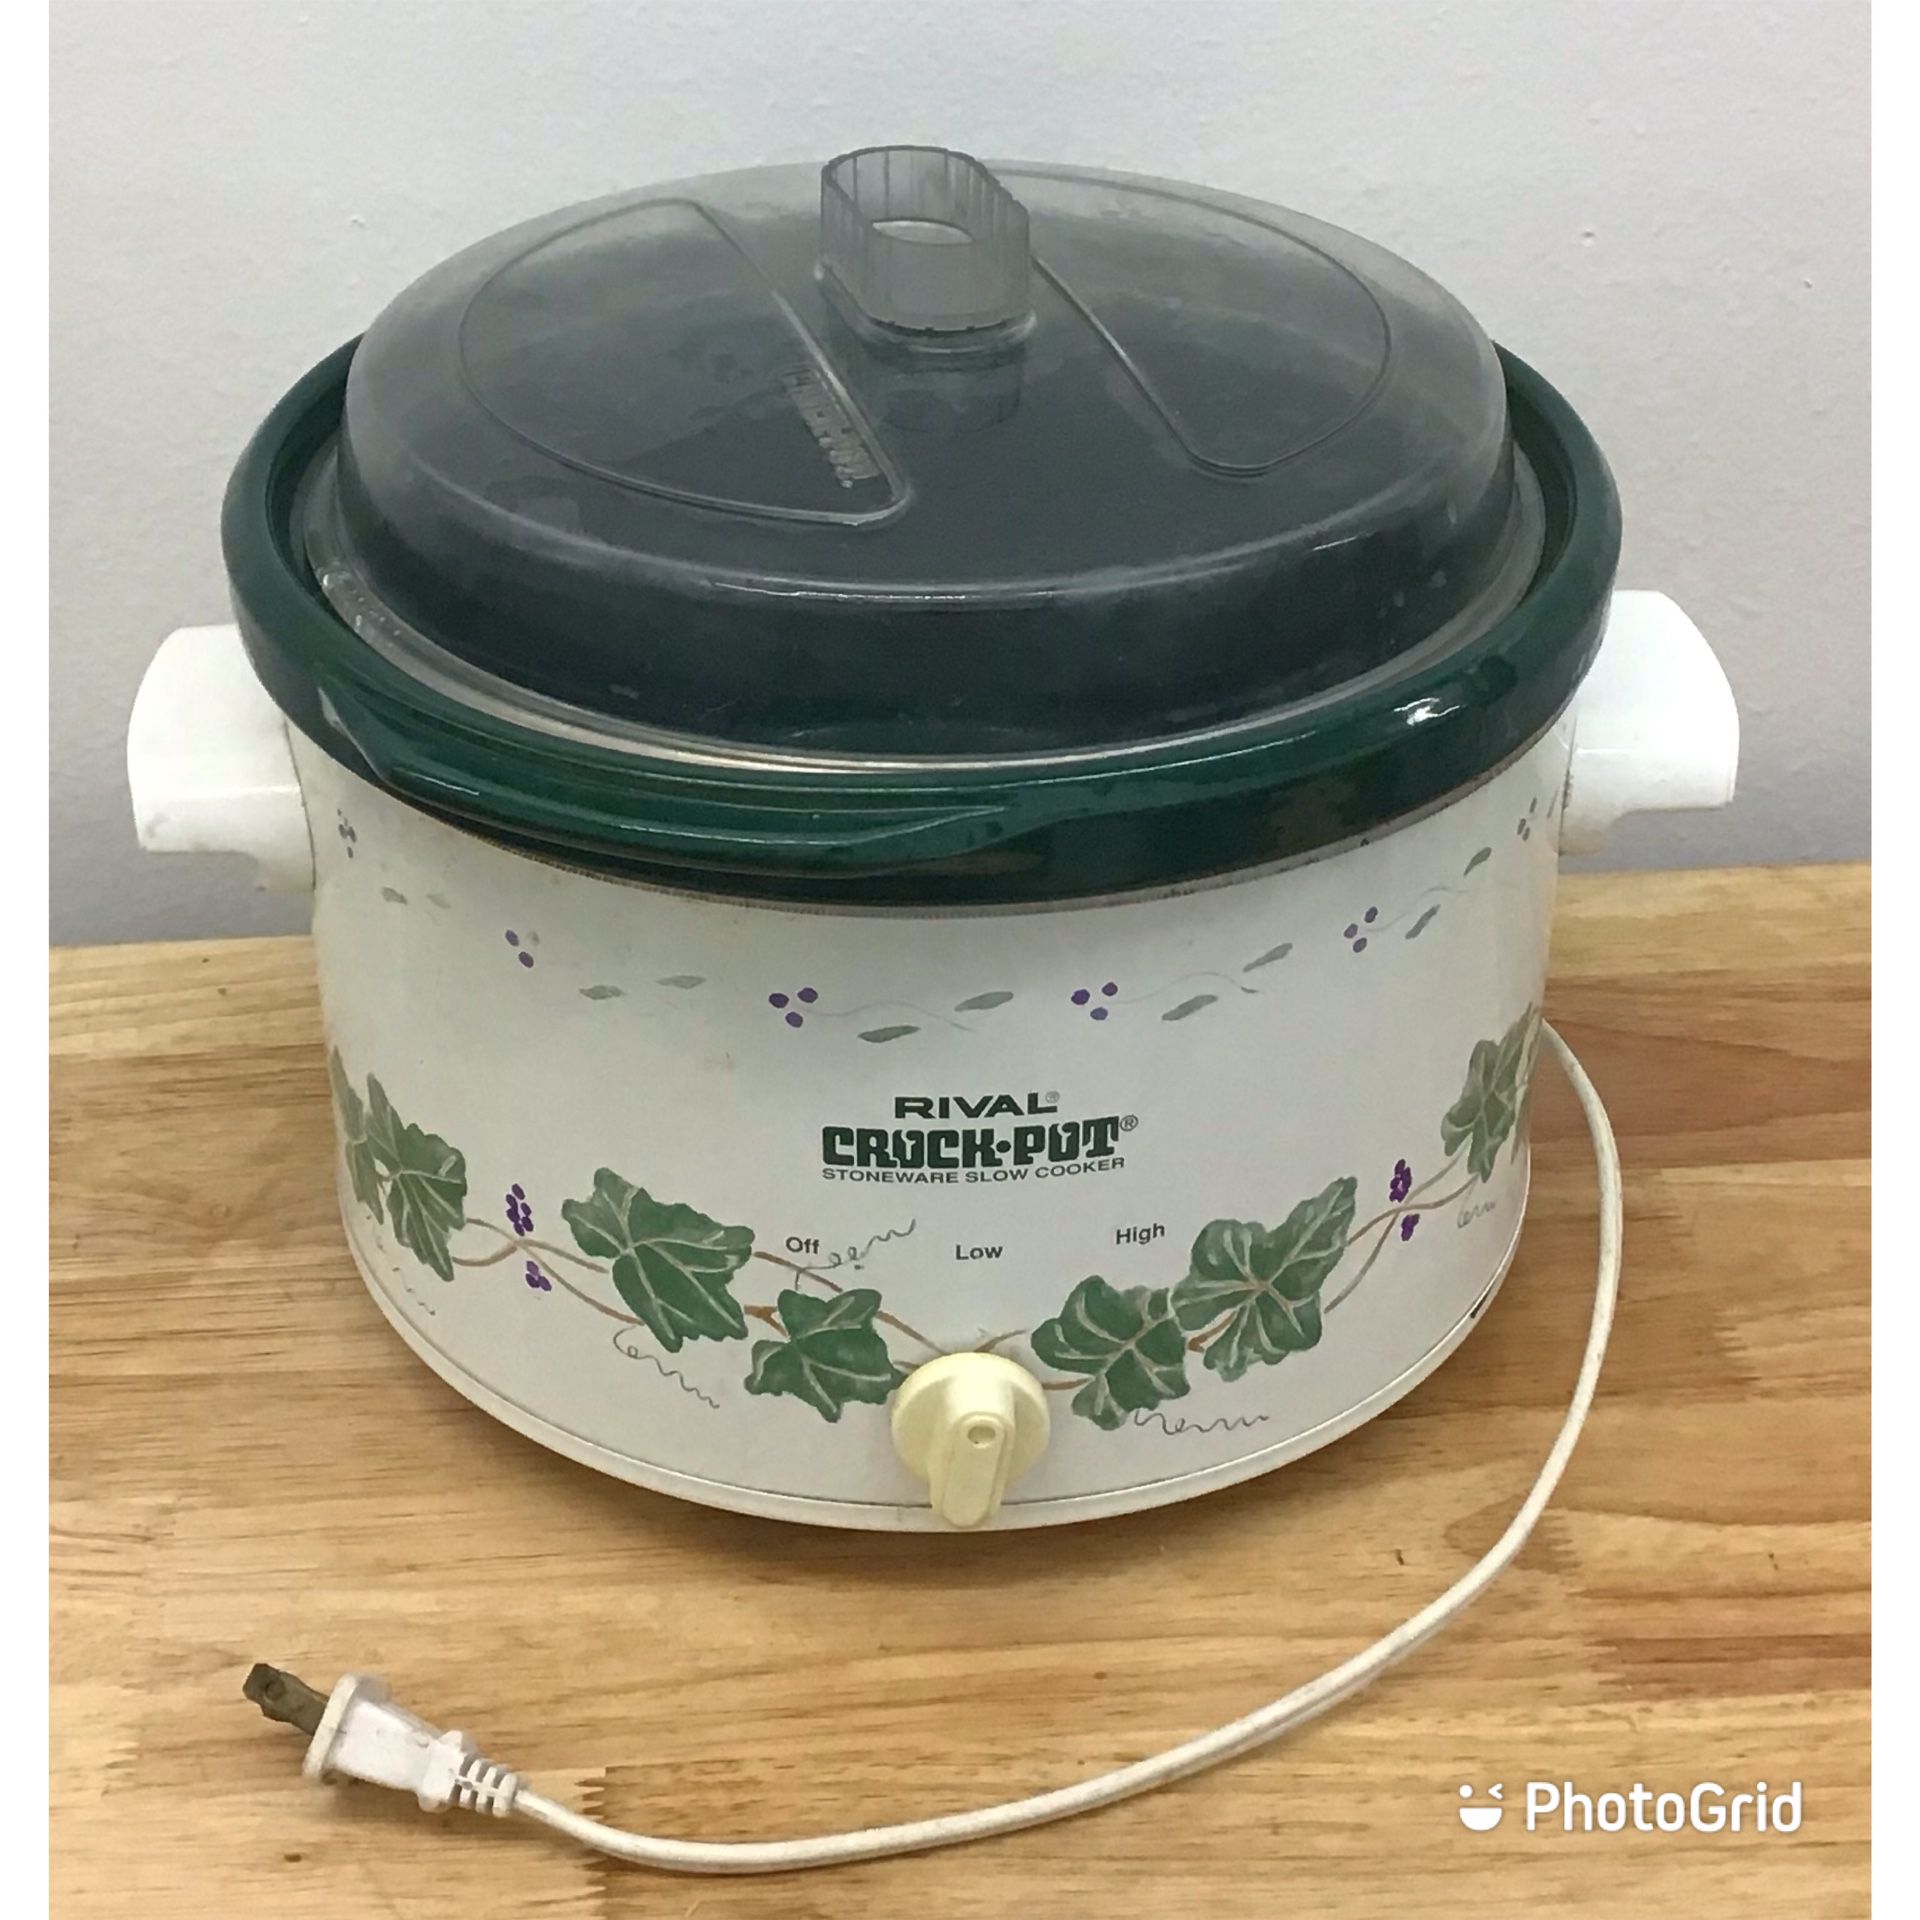 Vintage Rival Crock Pot Model 3154 Green Ivy Purple Flowers And Green  Stoneware Slow cooker In good condition for Sale in Cambridge, MA - OfferUp